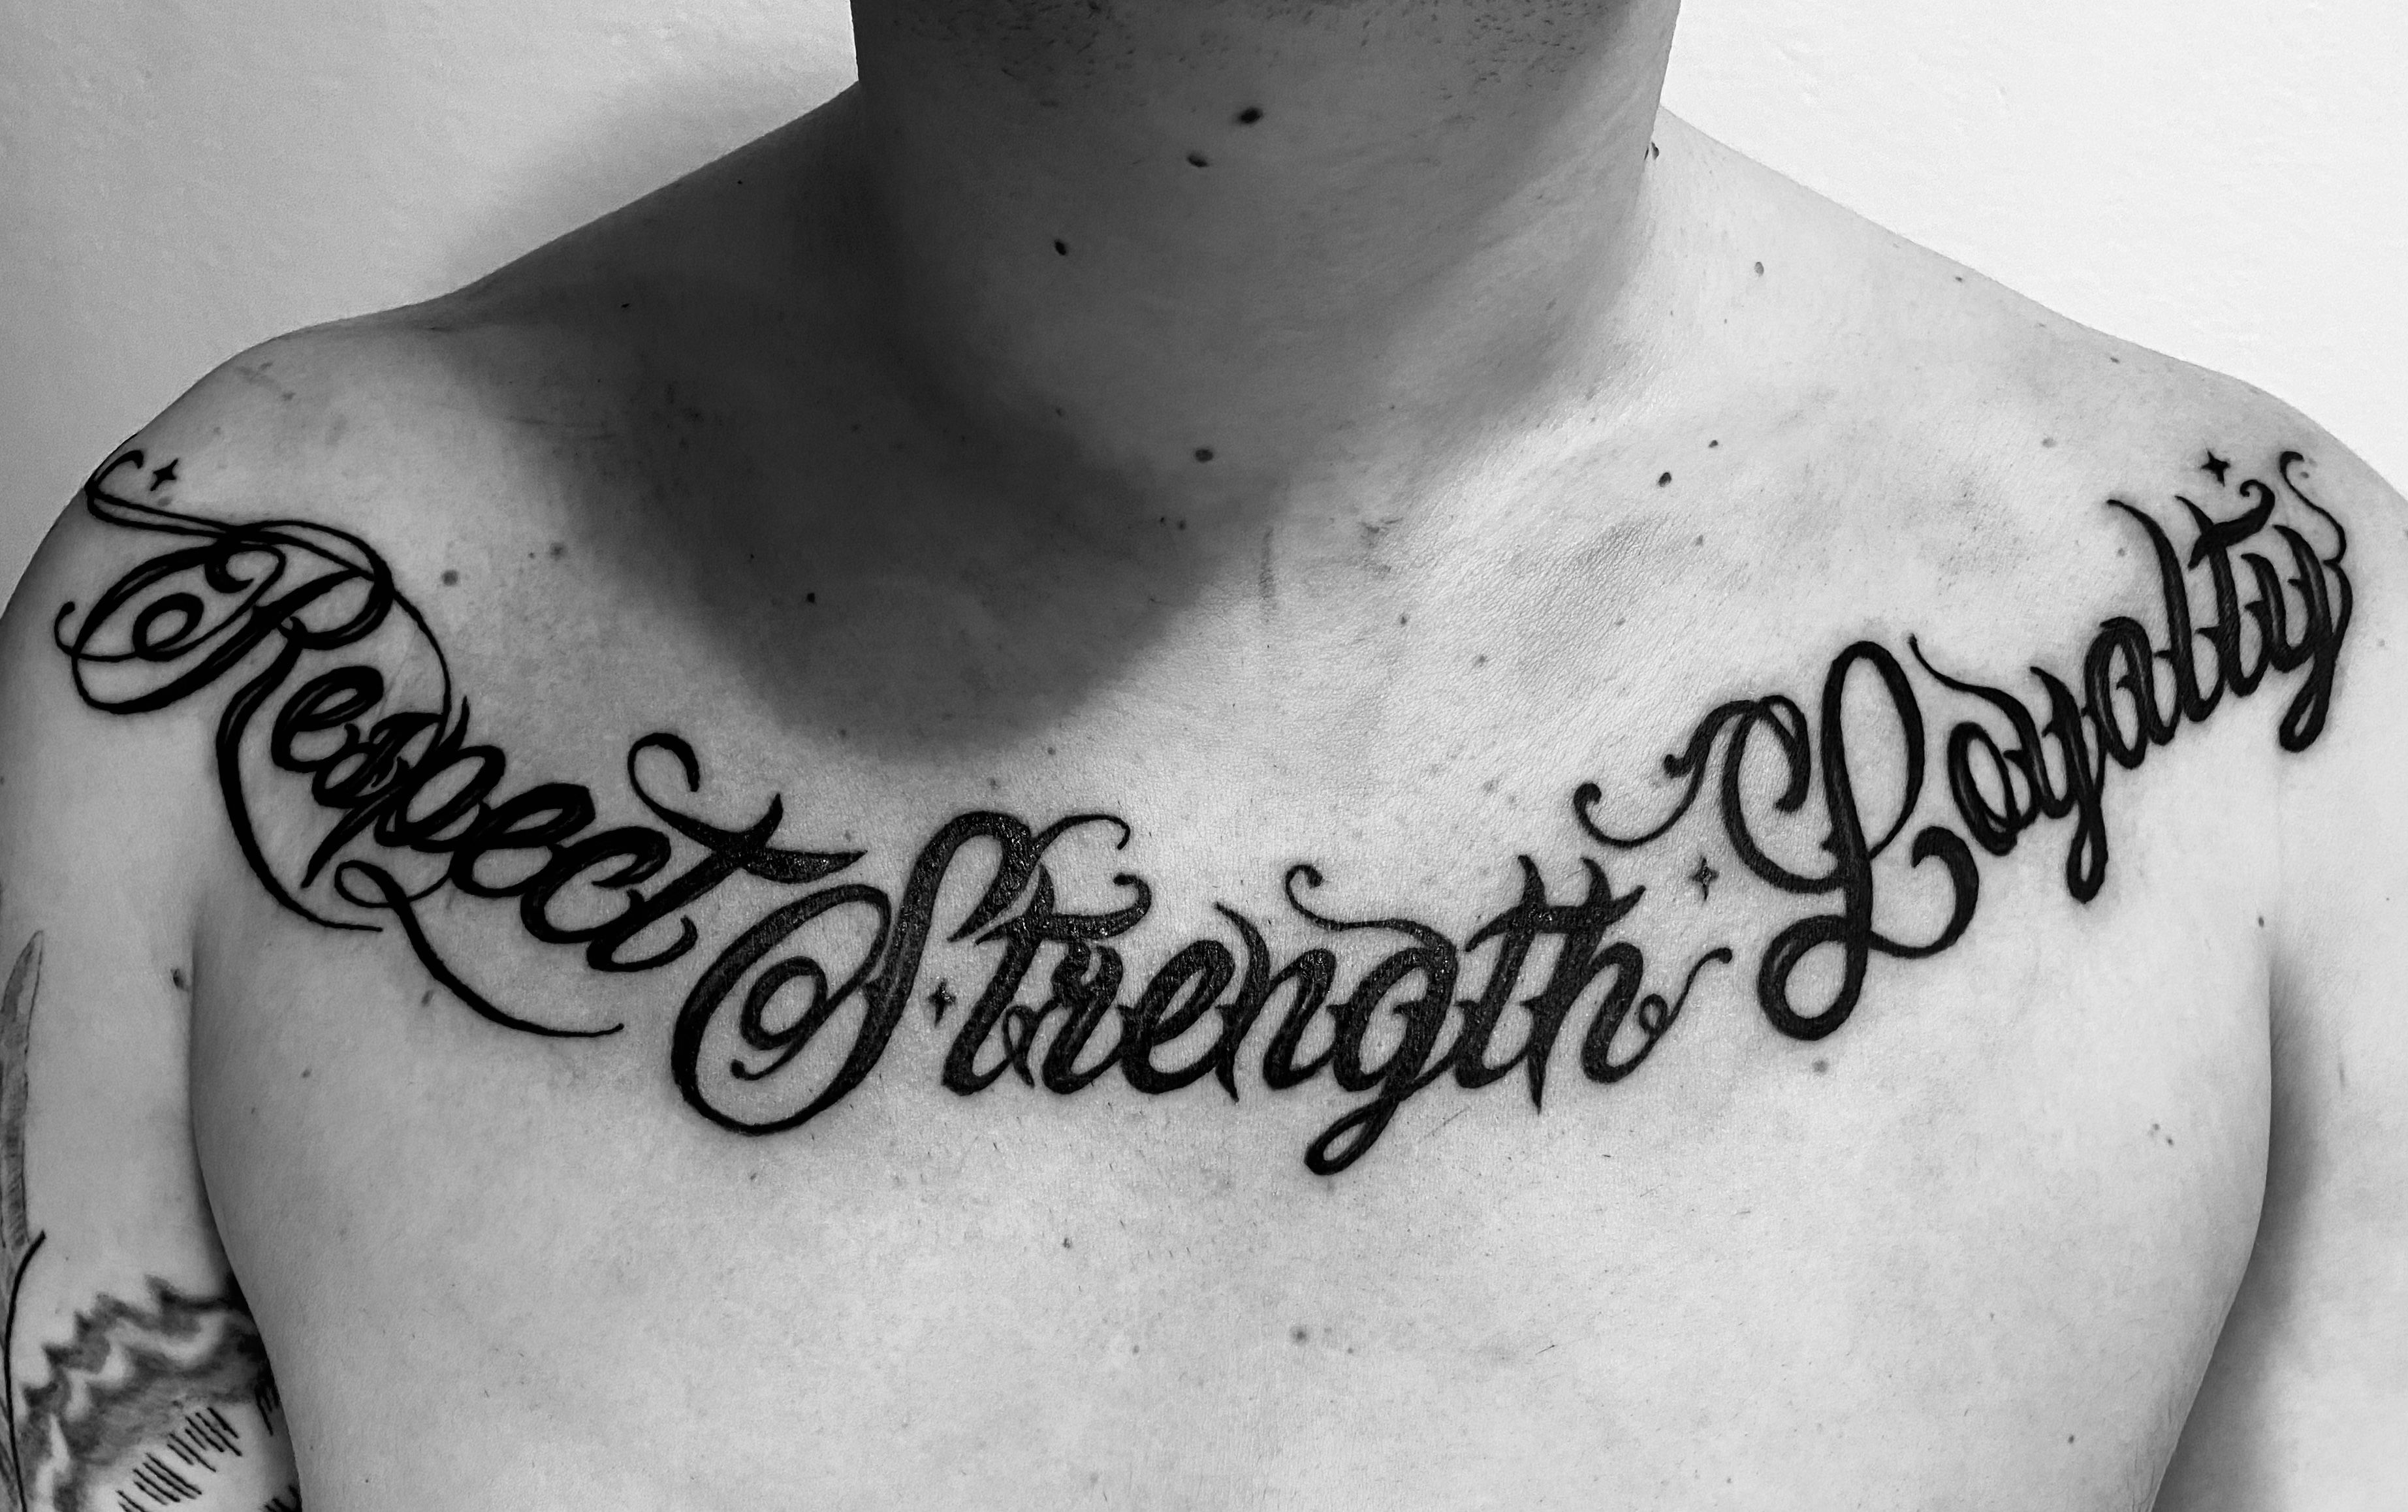 17 Loyalty Tattoo Ideas For Women And The Meaning Behind Them  Moms Got  the Stuff